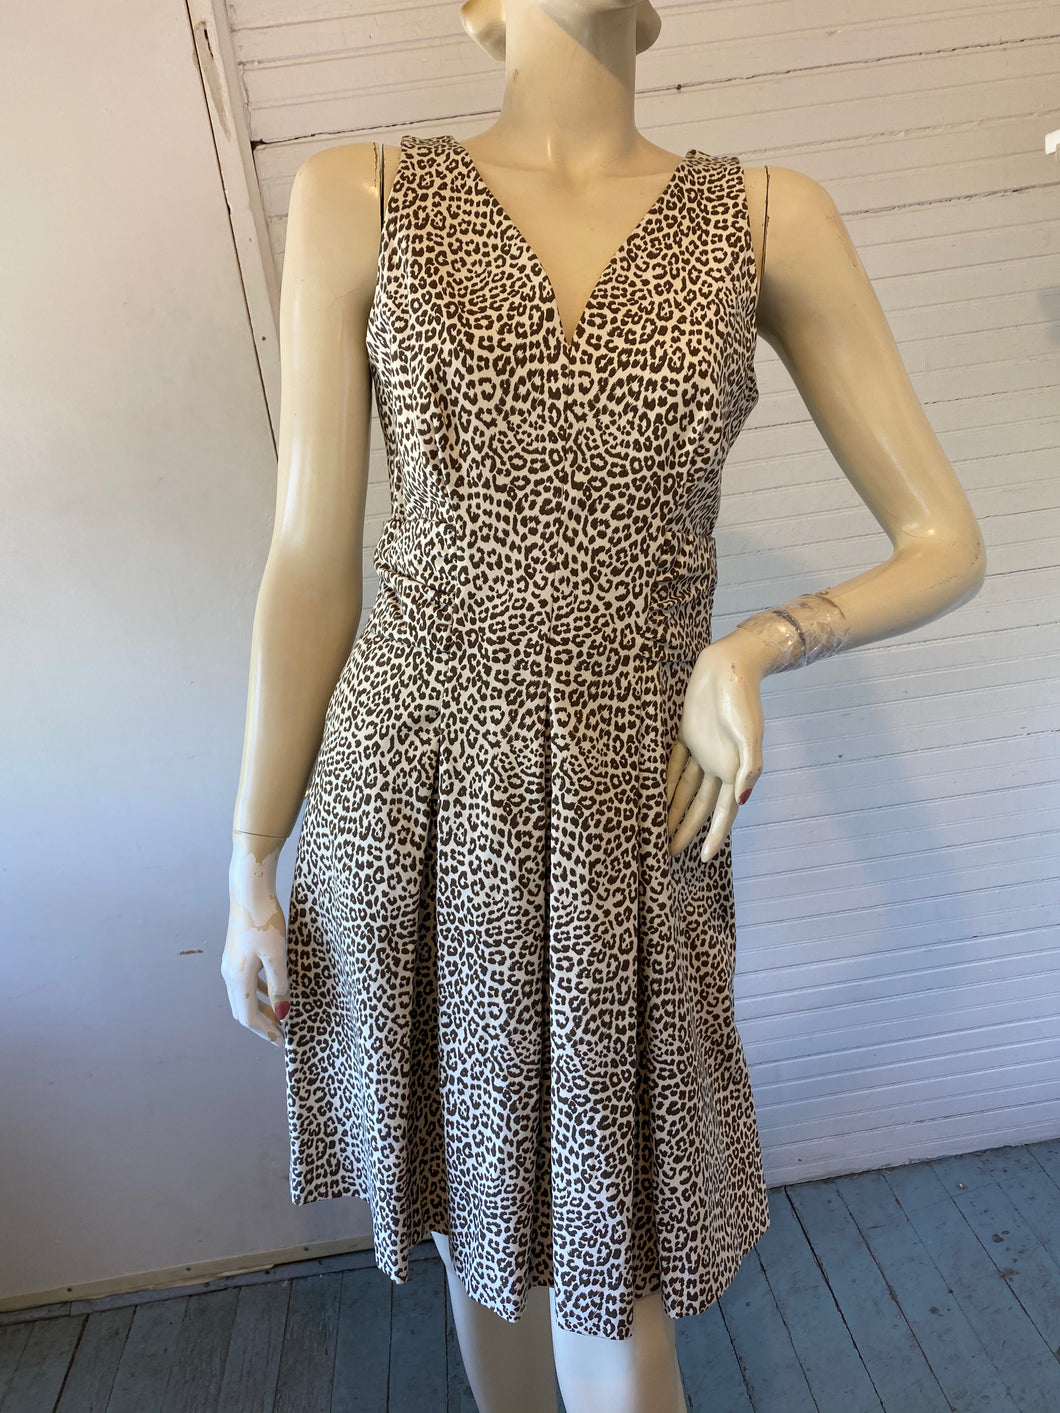 Issa London for Banana Republic Collection Fit-And-Flare Leopard Print Dress, size M (US 8)